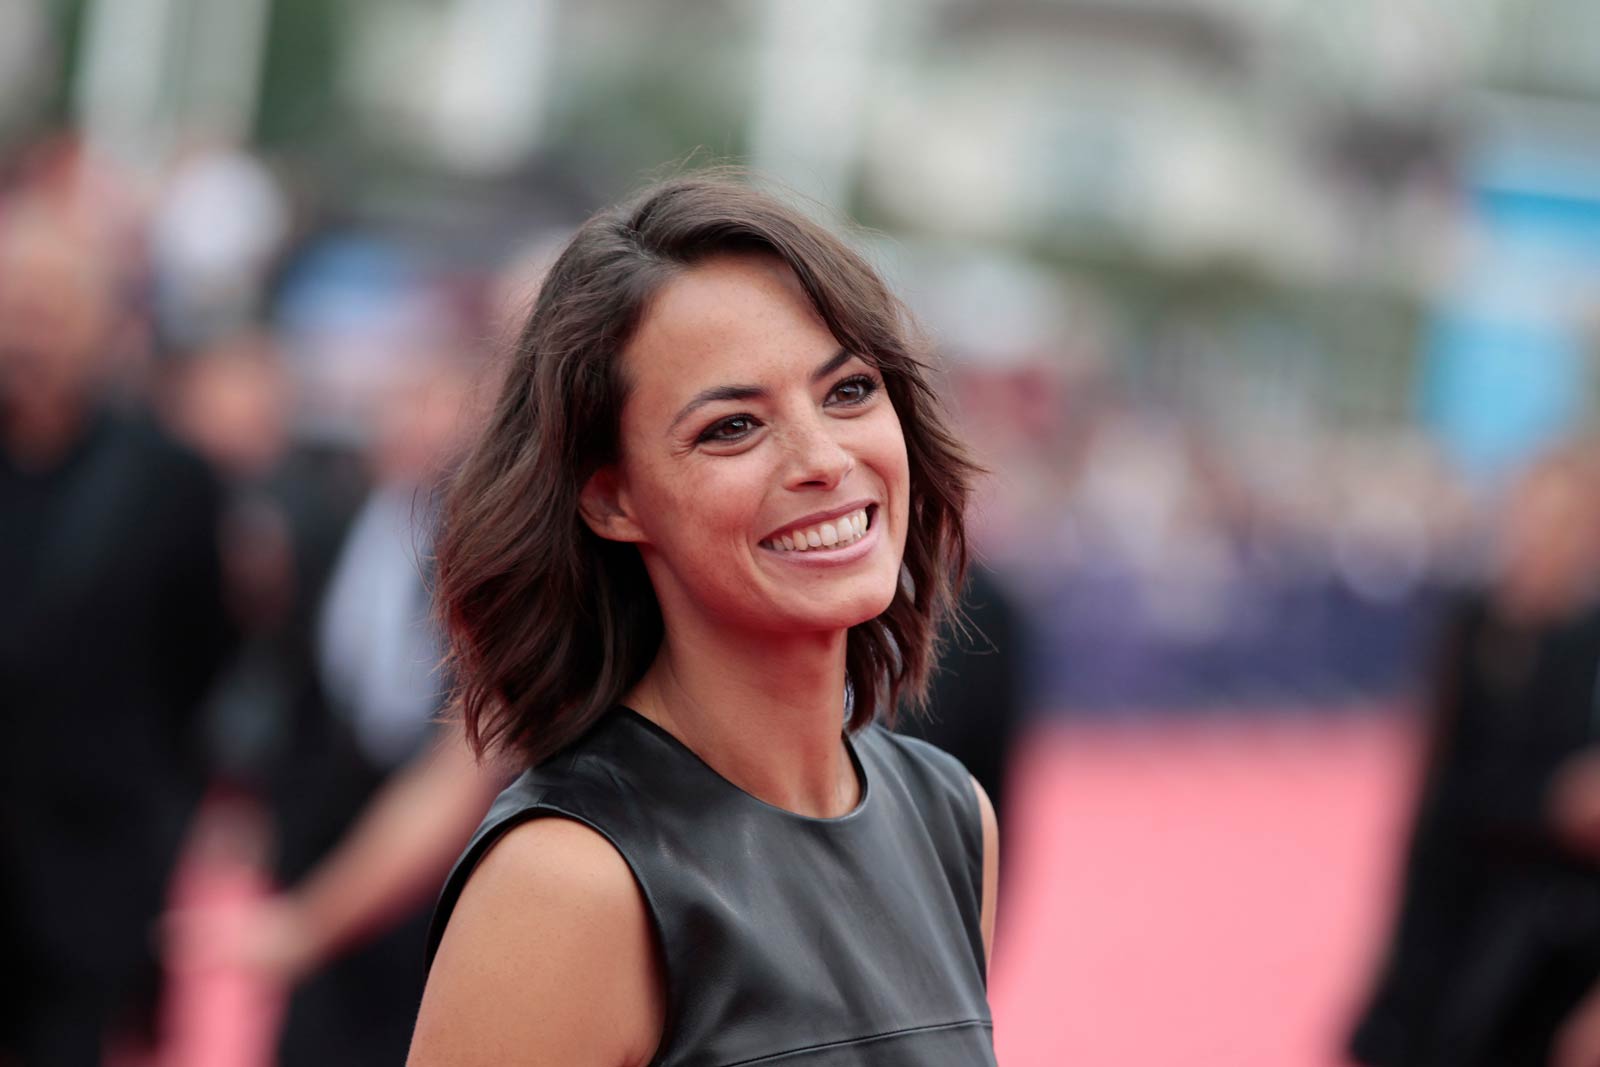 Berenice Bejo attended the opening ceremony of the 40th Annual Deauville American Film Festival